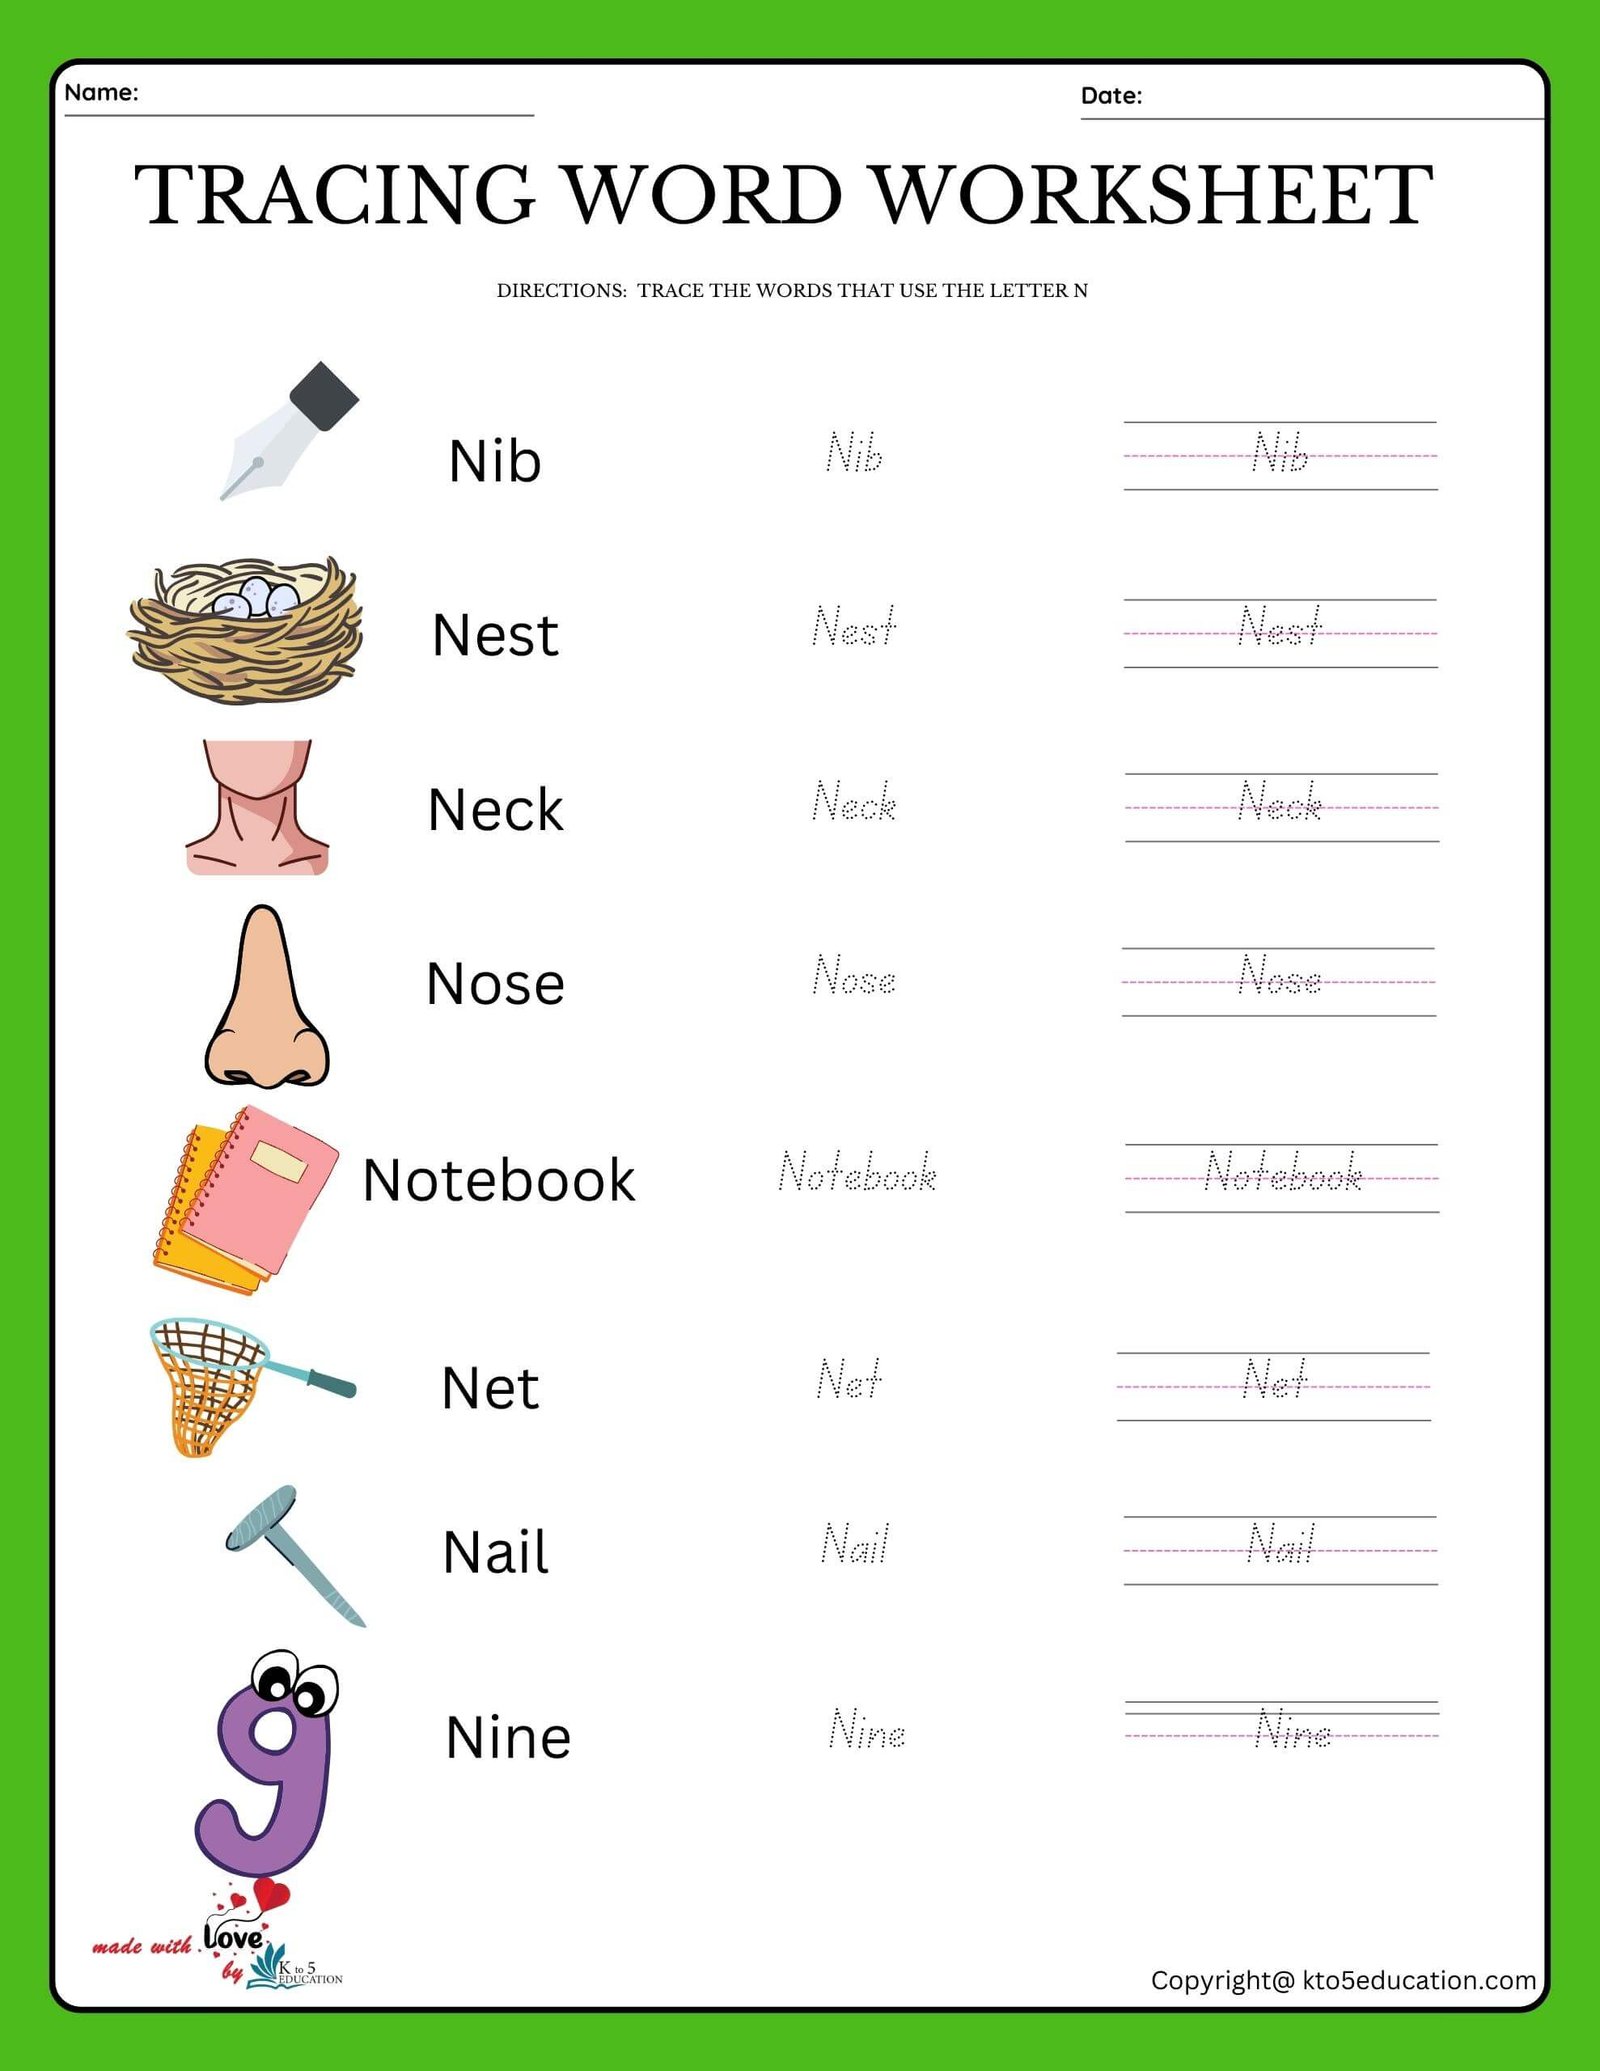 Trace The Words That Use The Letter N Worksheet